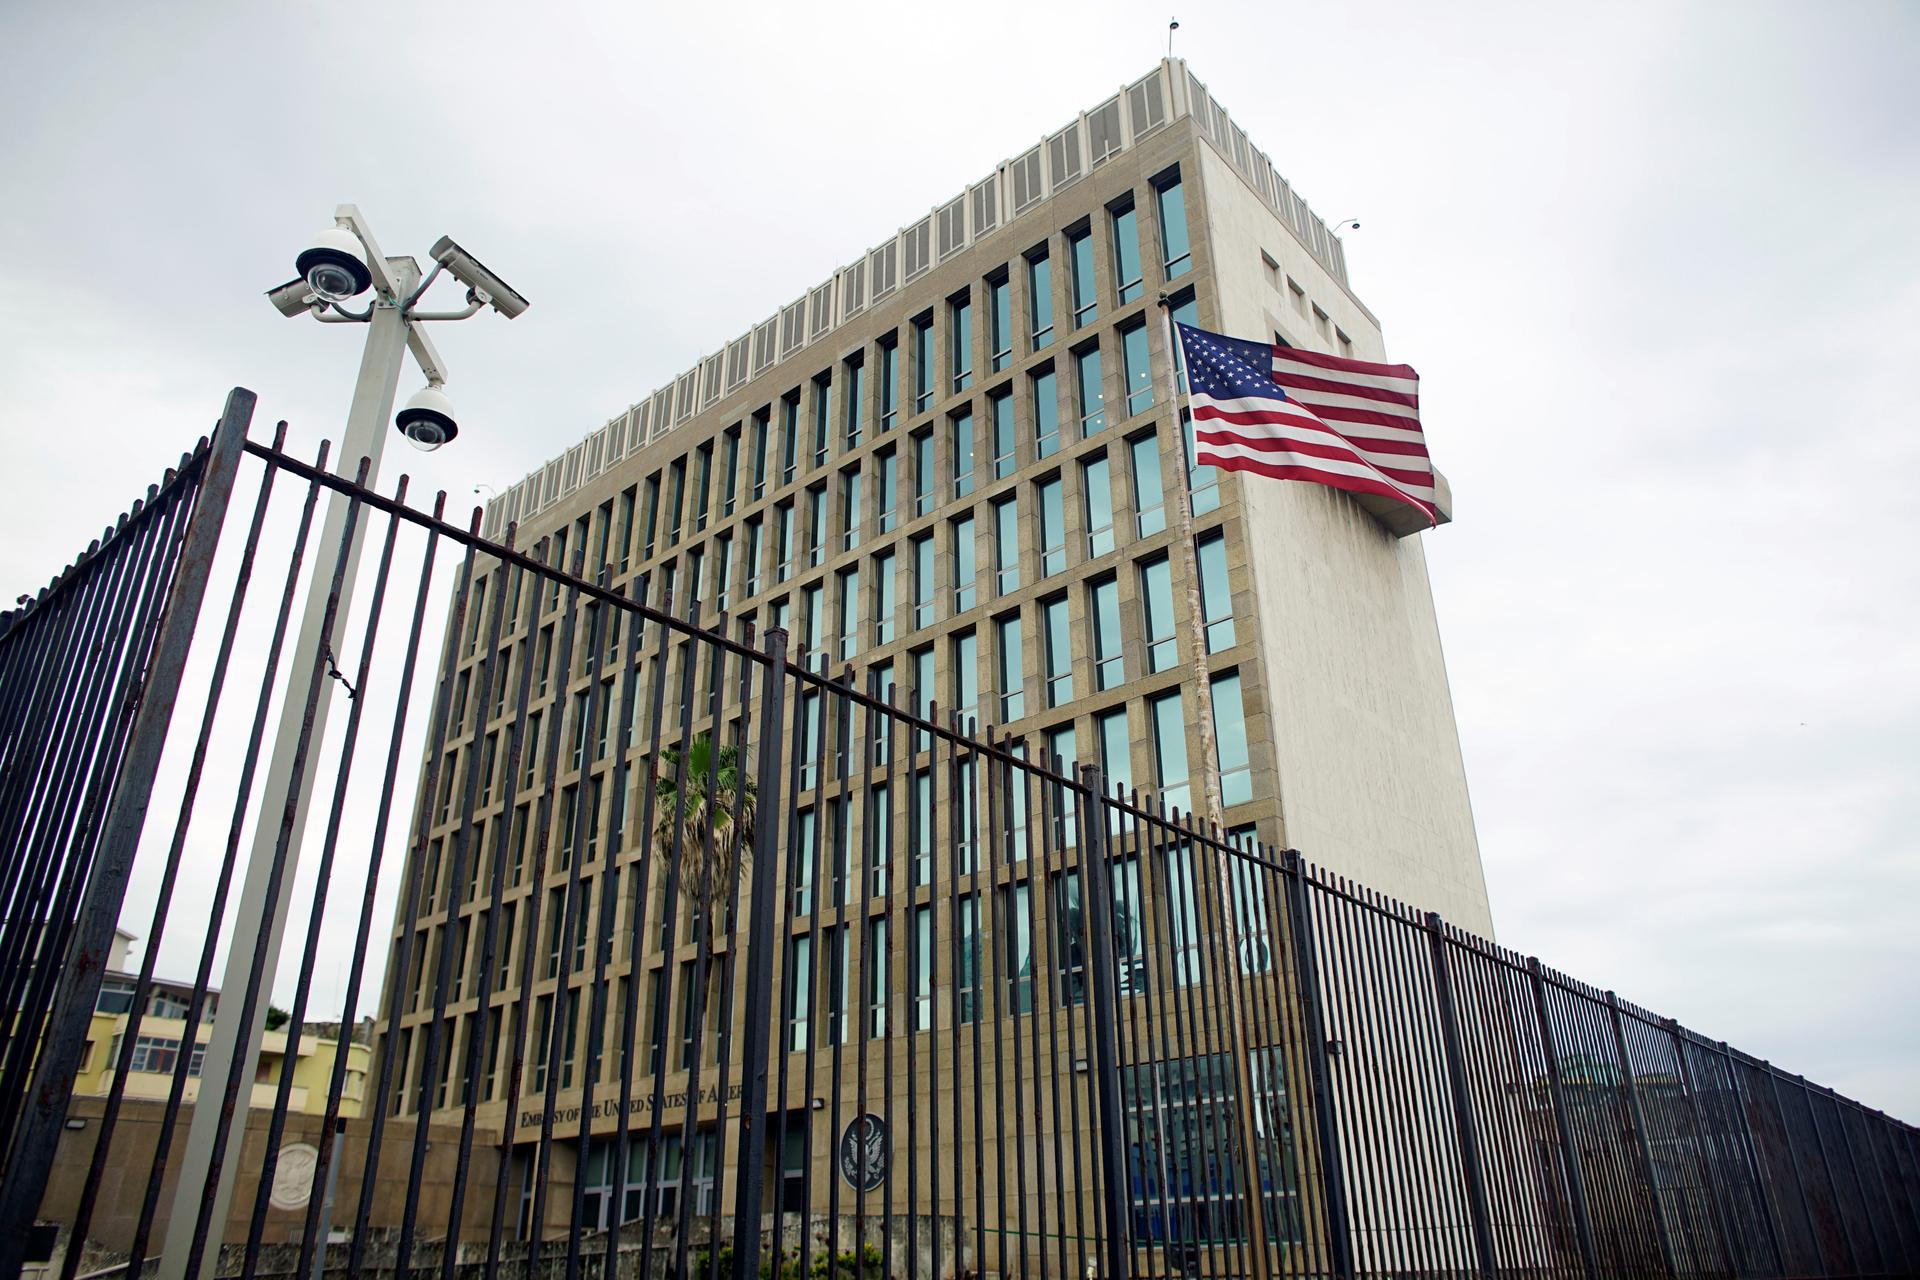 An exterior view of the US Embassy in Havana, Cuba